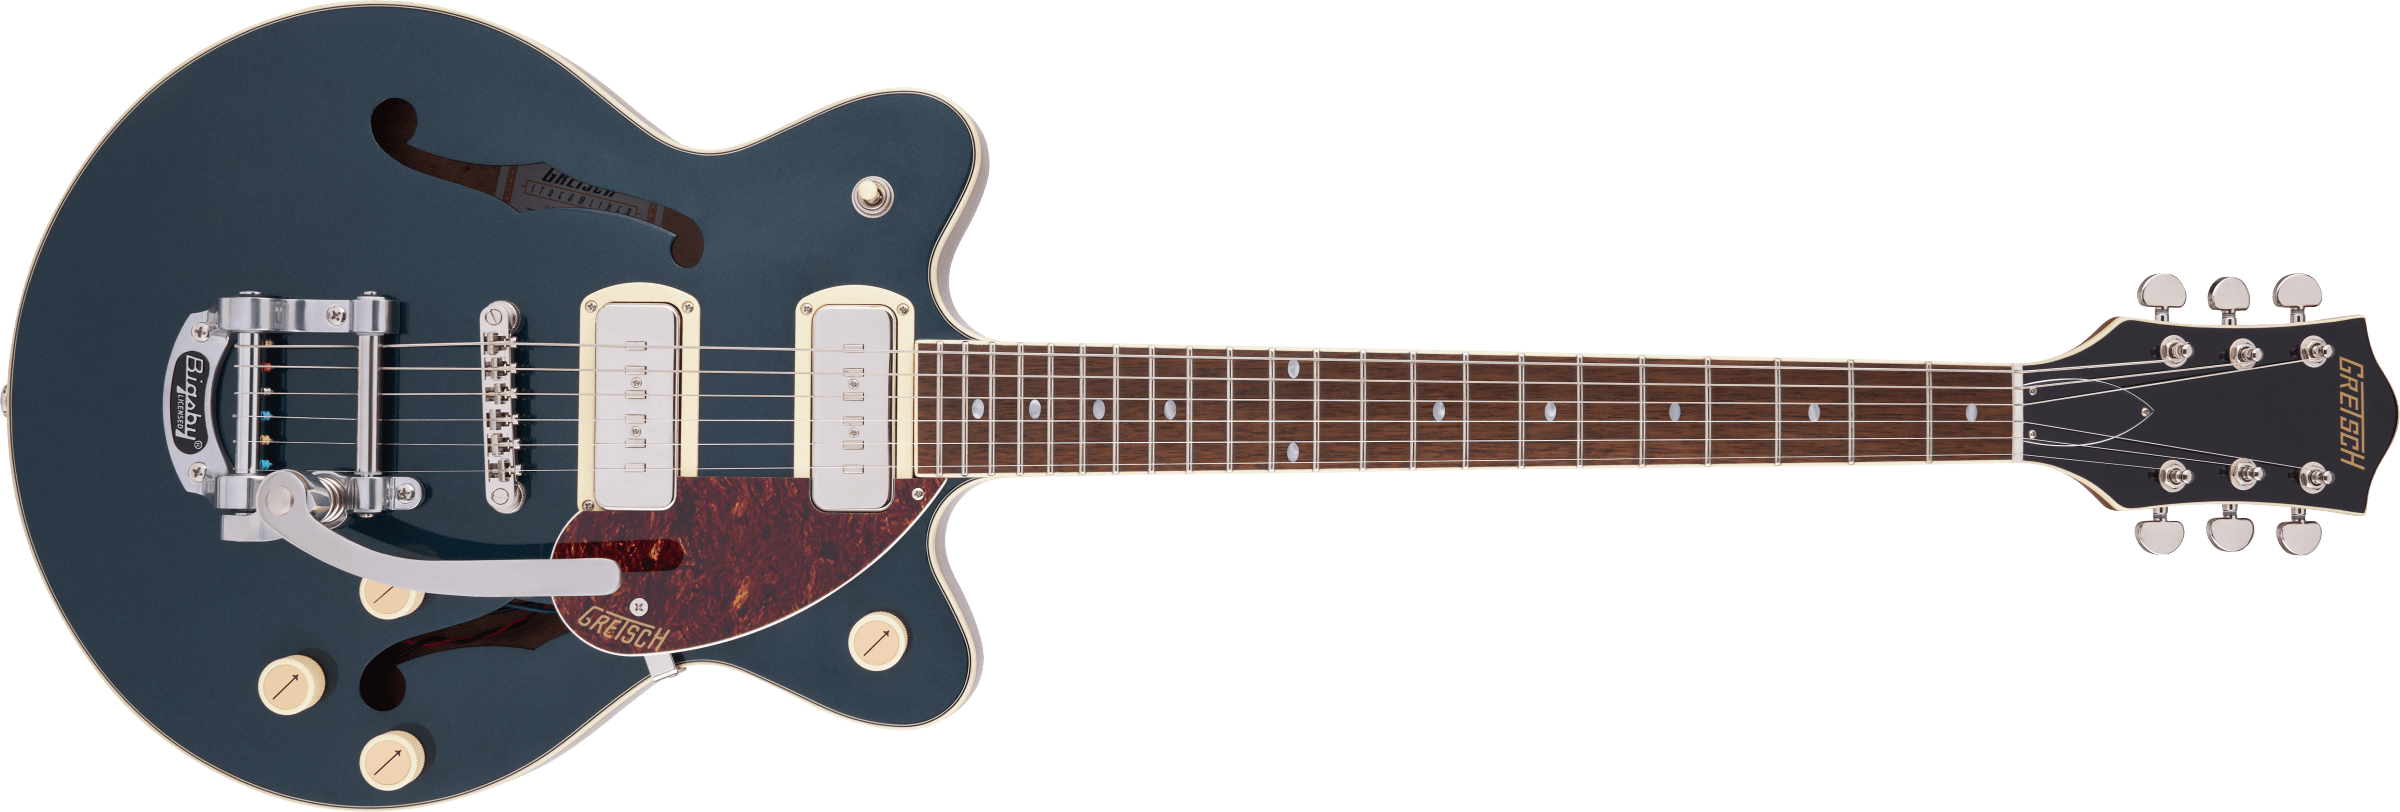 Gretsch G2655T-P90 Streamliner™ Center Block Jr. Double-Cut P90 with Bigsby®, Laurel Fingerboard, Two-Tone Midnight Sapphire and Vintage Mahogany Stain 2807700533